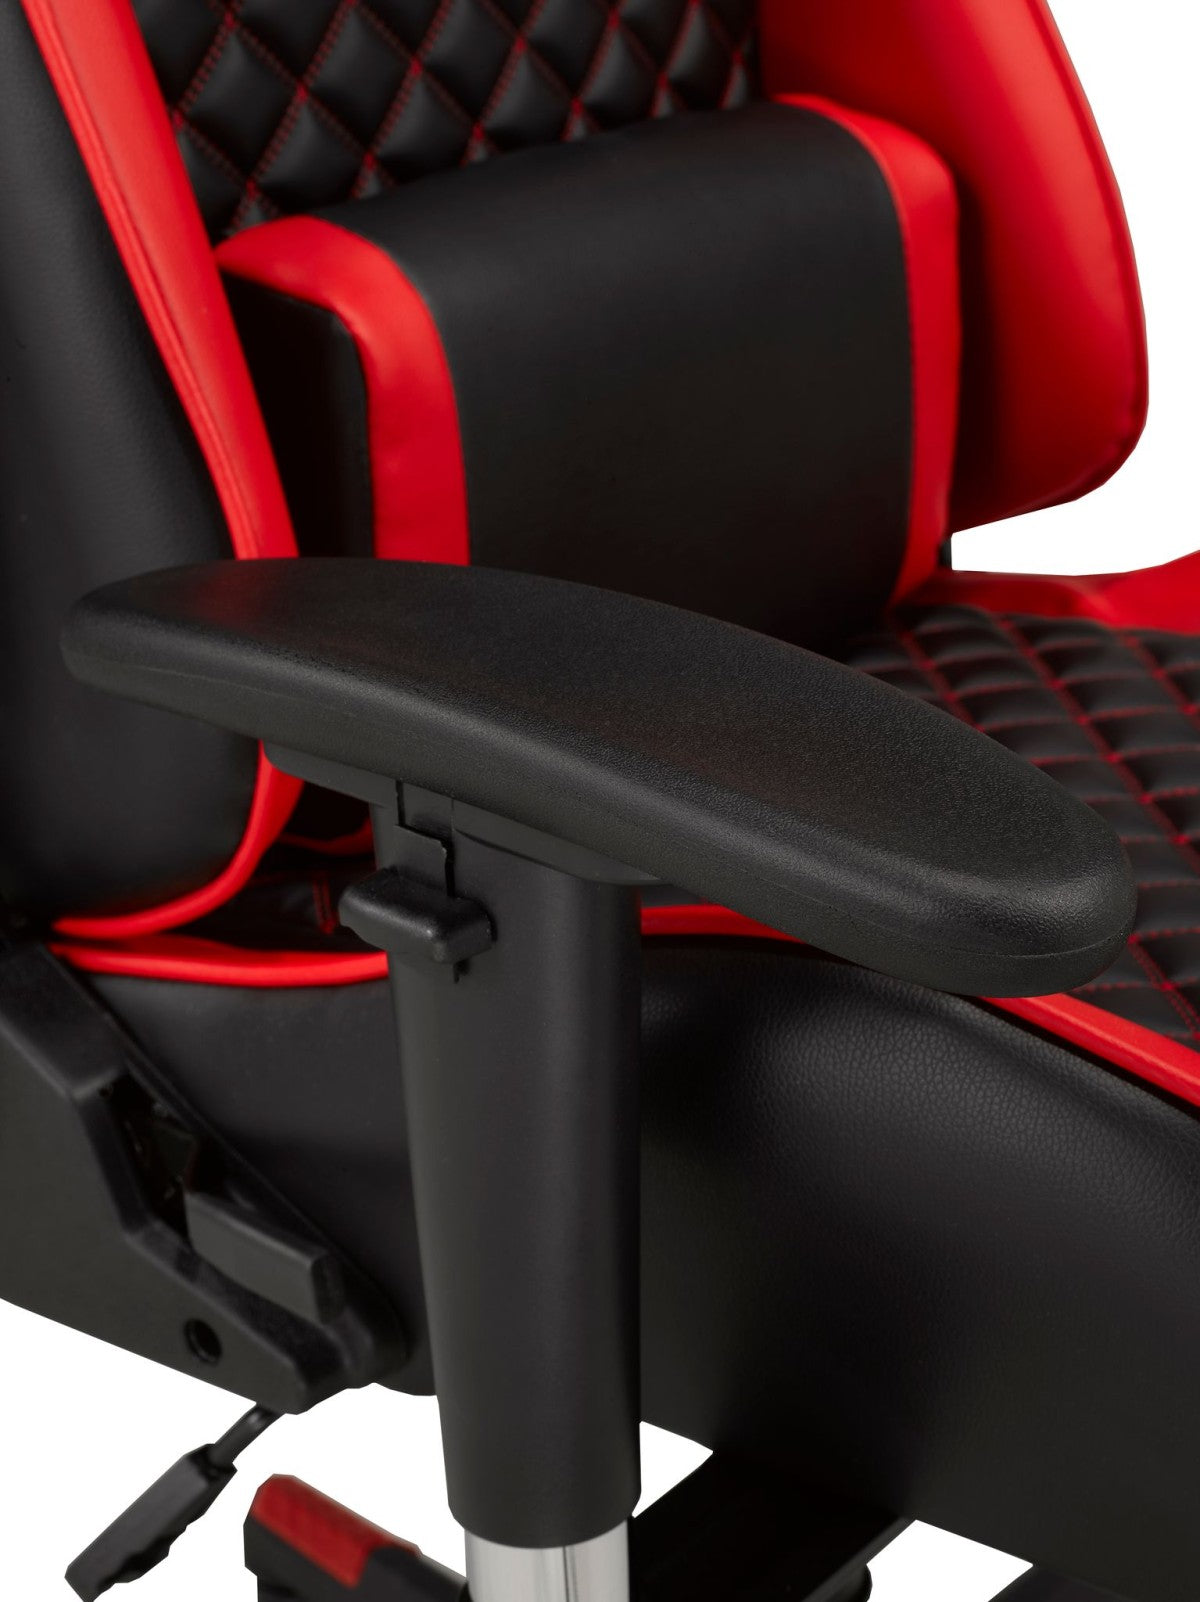 Office Chair Black/Red 3800